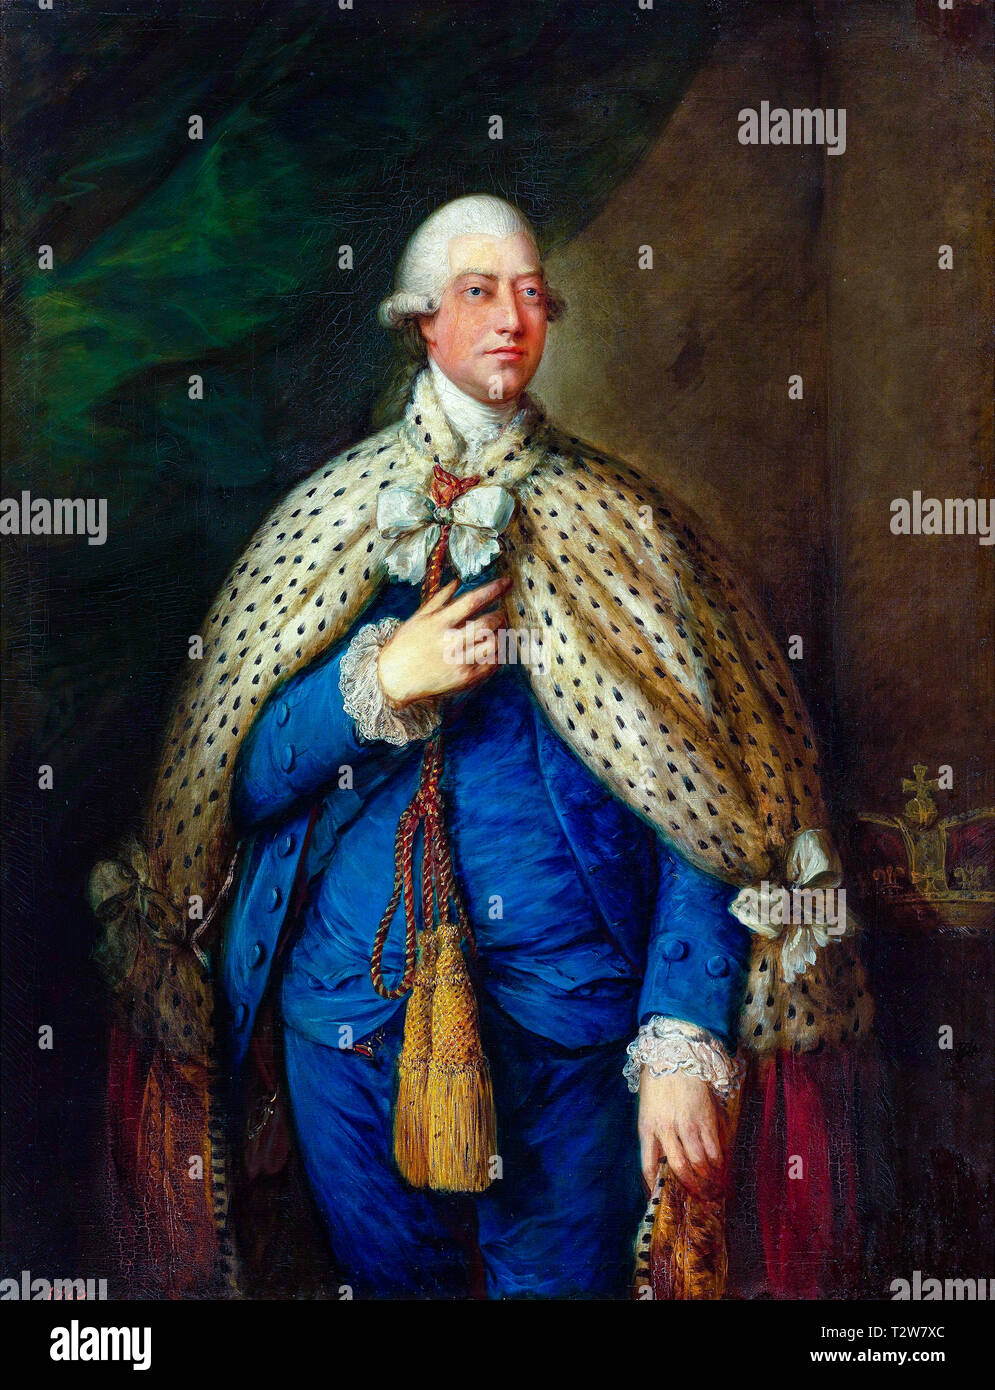 Thomas Gainsborough, Portrait of King George III of the United Kingdom in parliamentary robes, 1785 Stock Photo